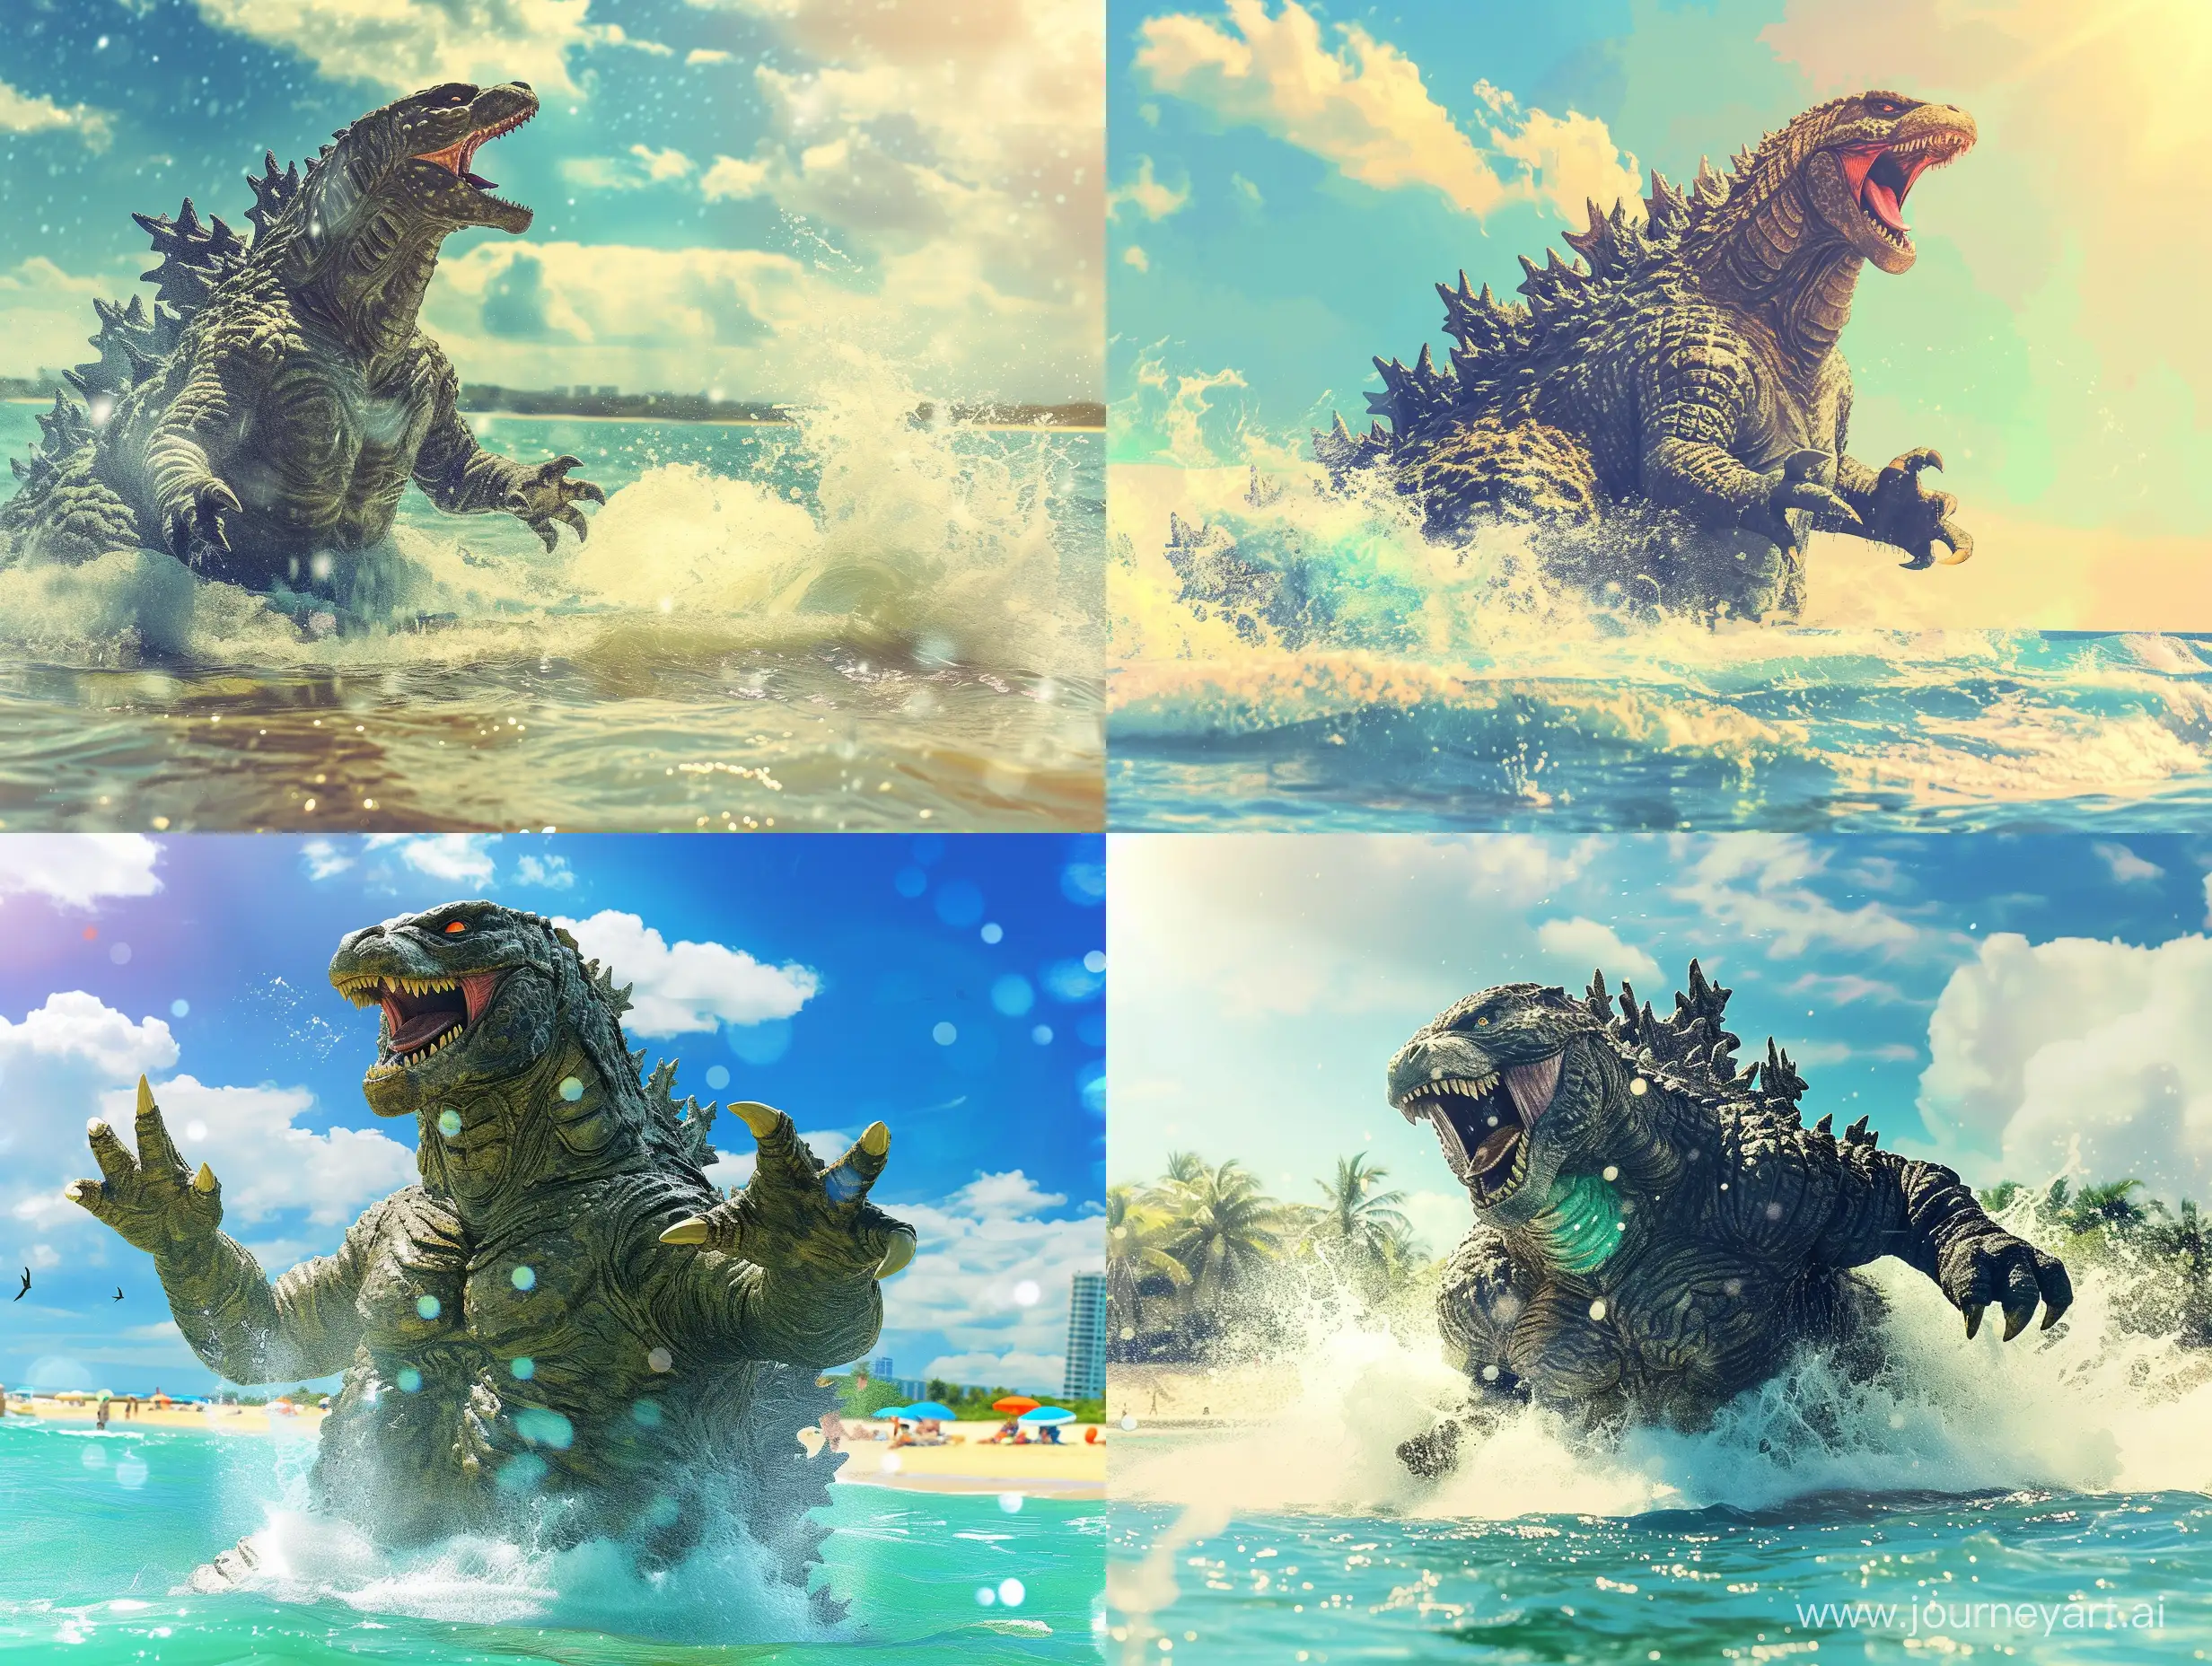 Majestic-Godzilla-Emerges-from-Ocean-on-Sunny-Beach-Day